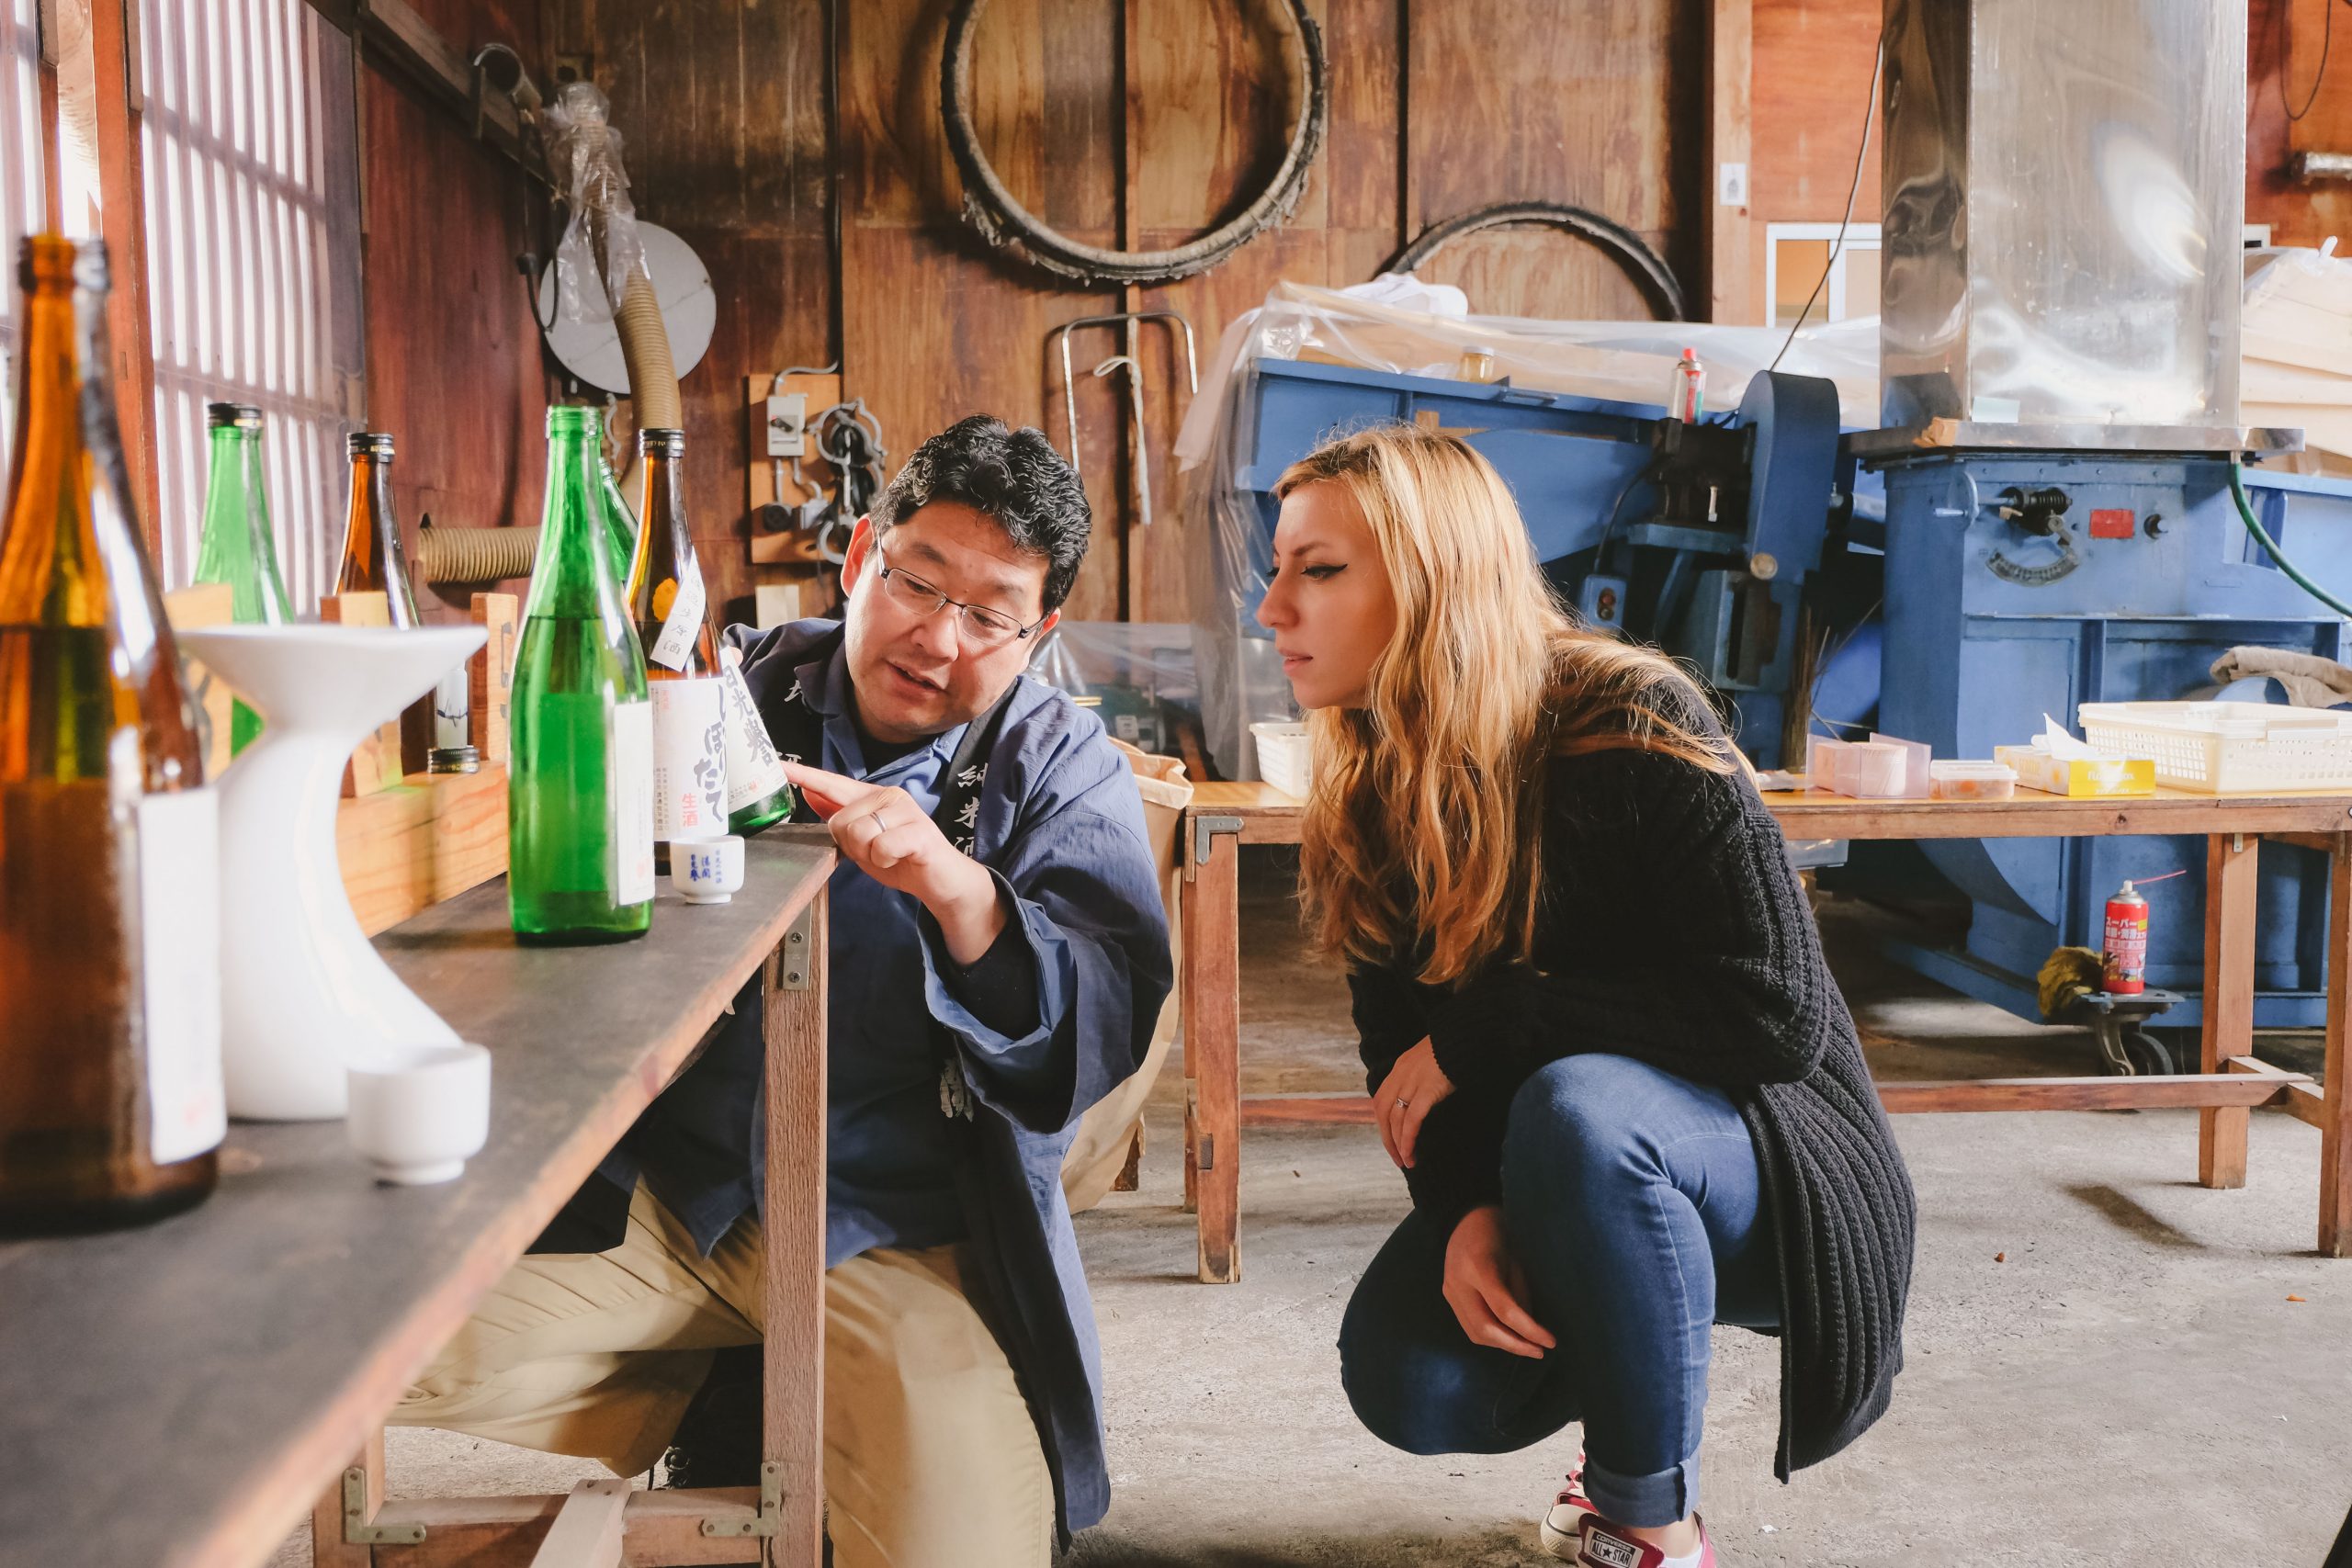 Must try in Japan: Cory visiting a local sake brewery and taking to the owner about how sake is produced